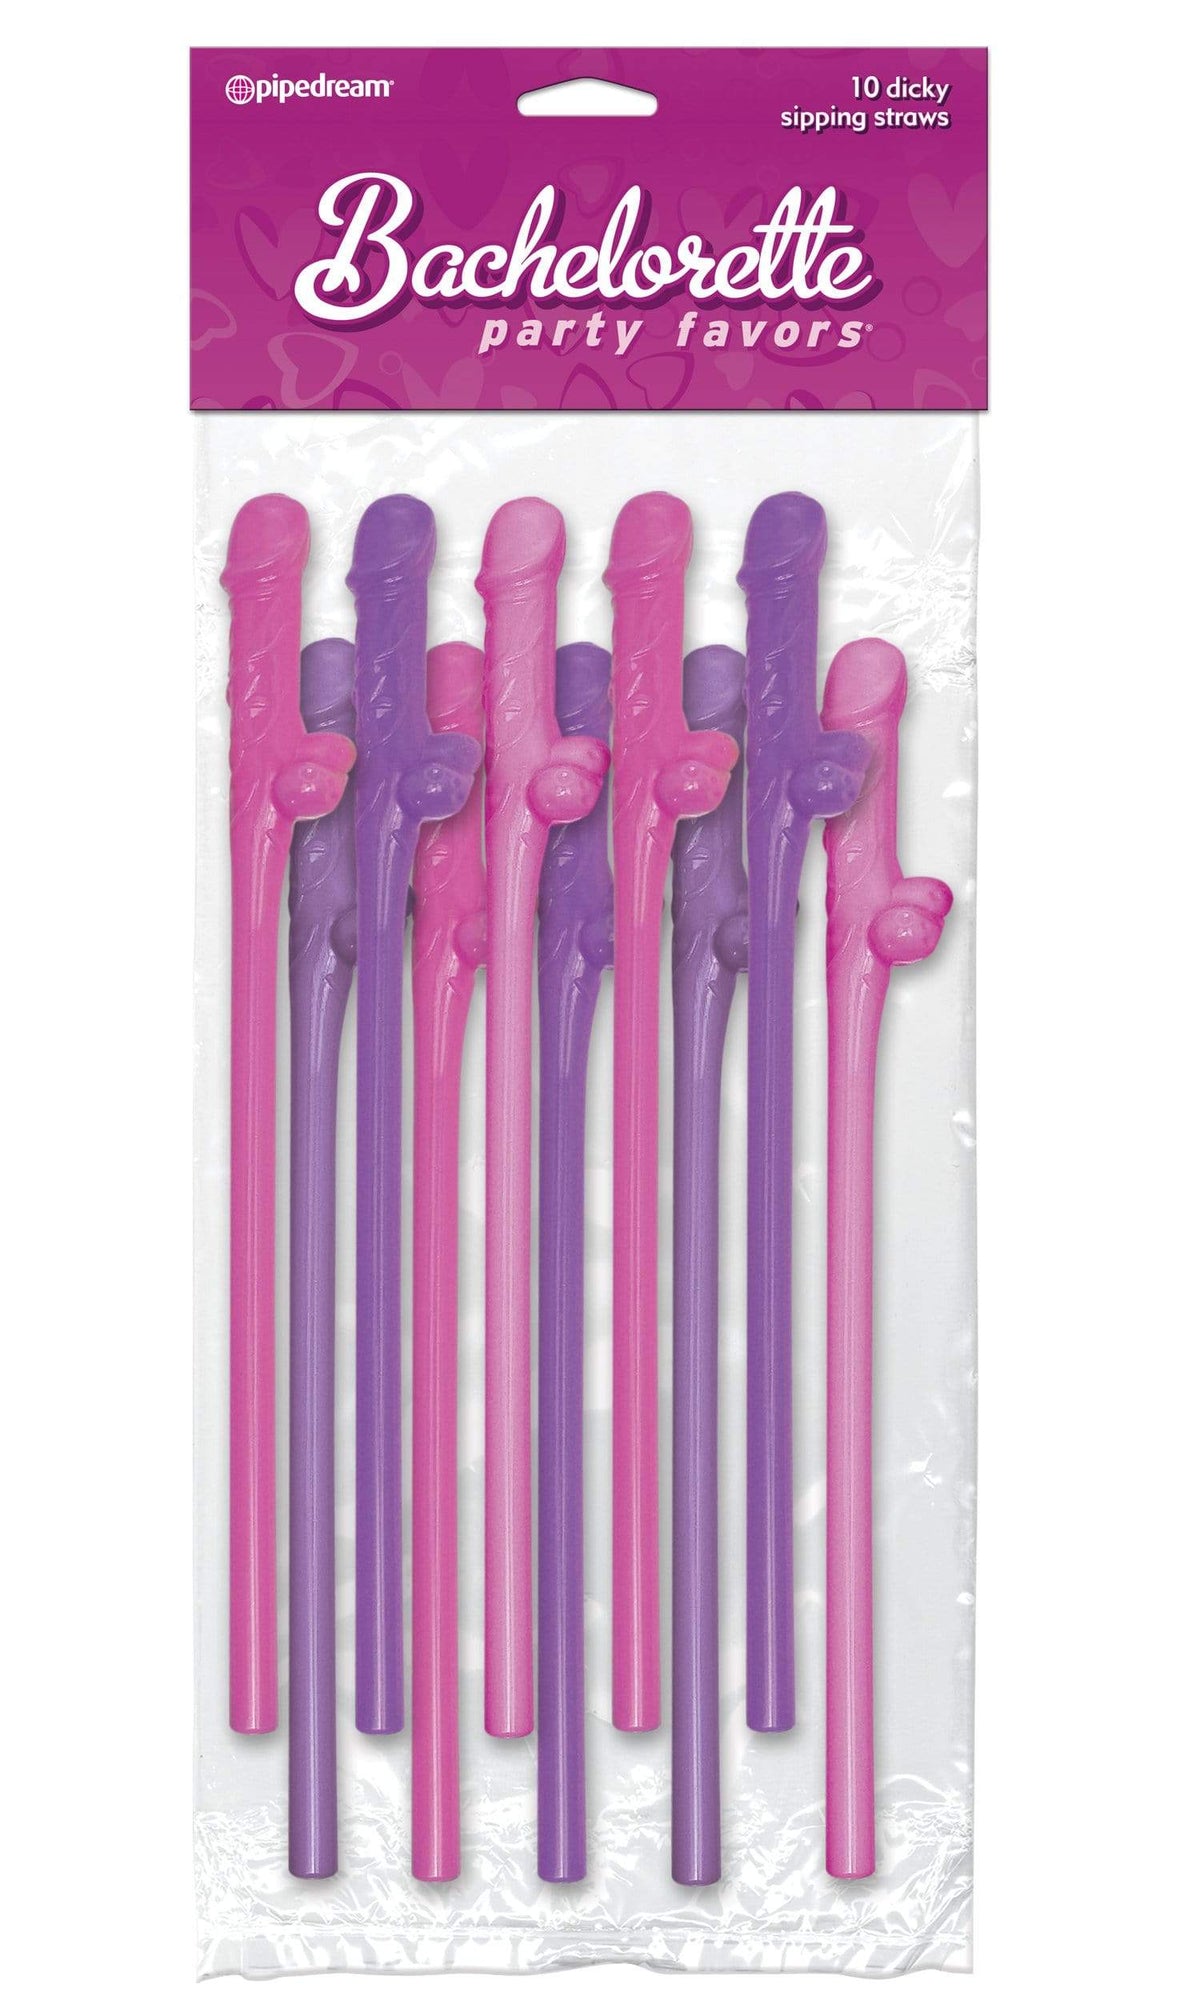 bachelorette party favors 10 dicky sipping straws pink purple